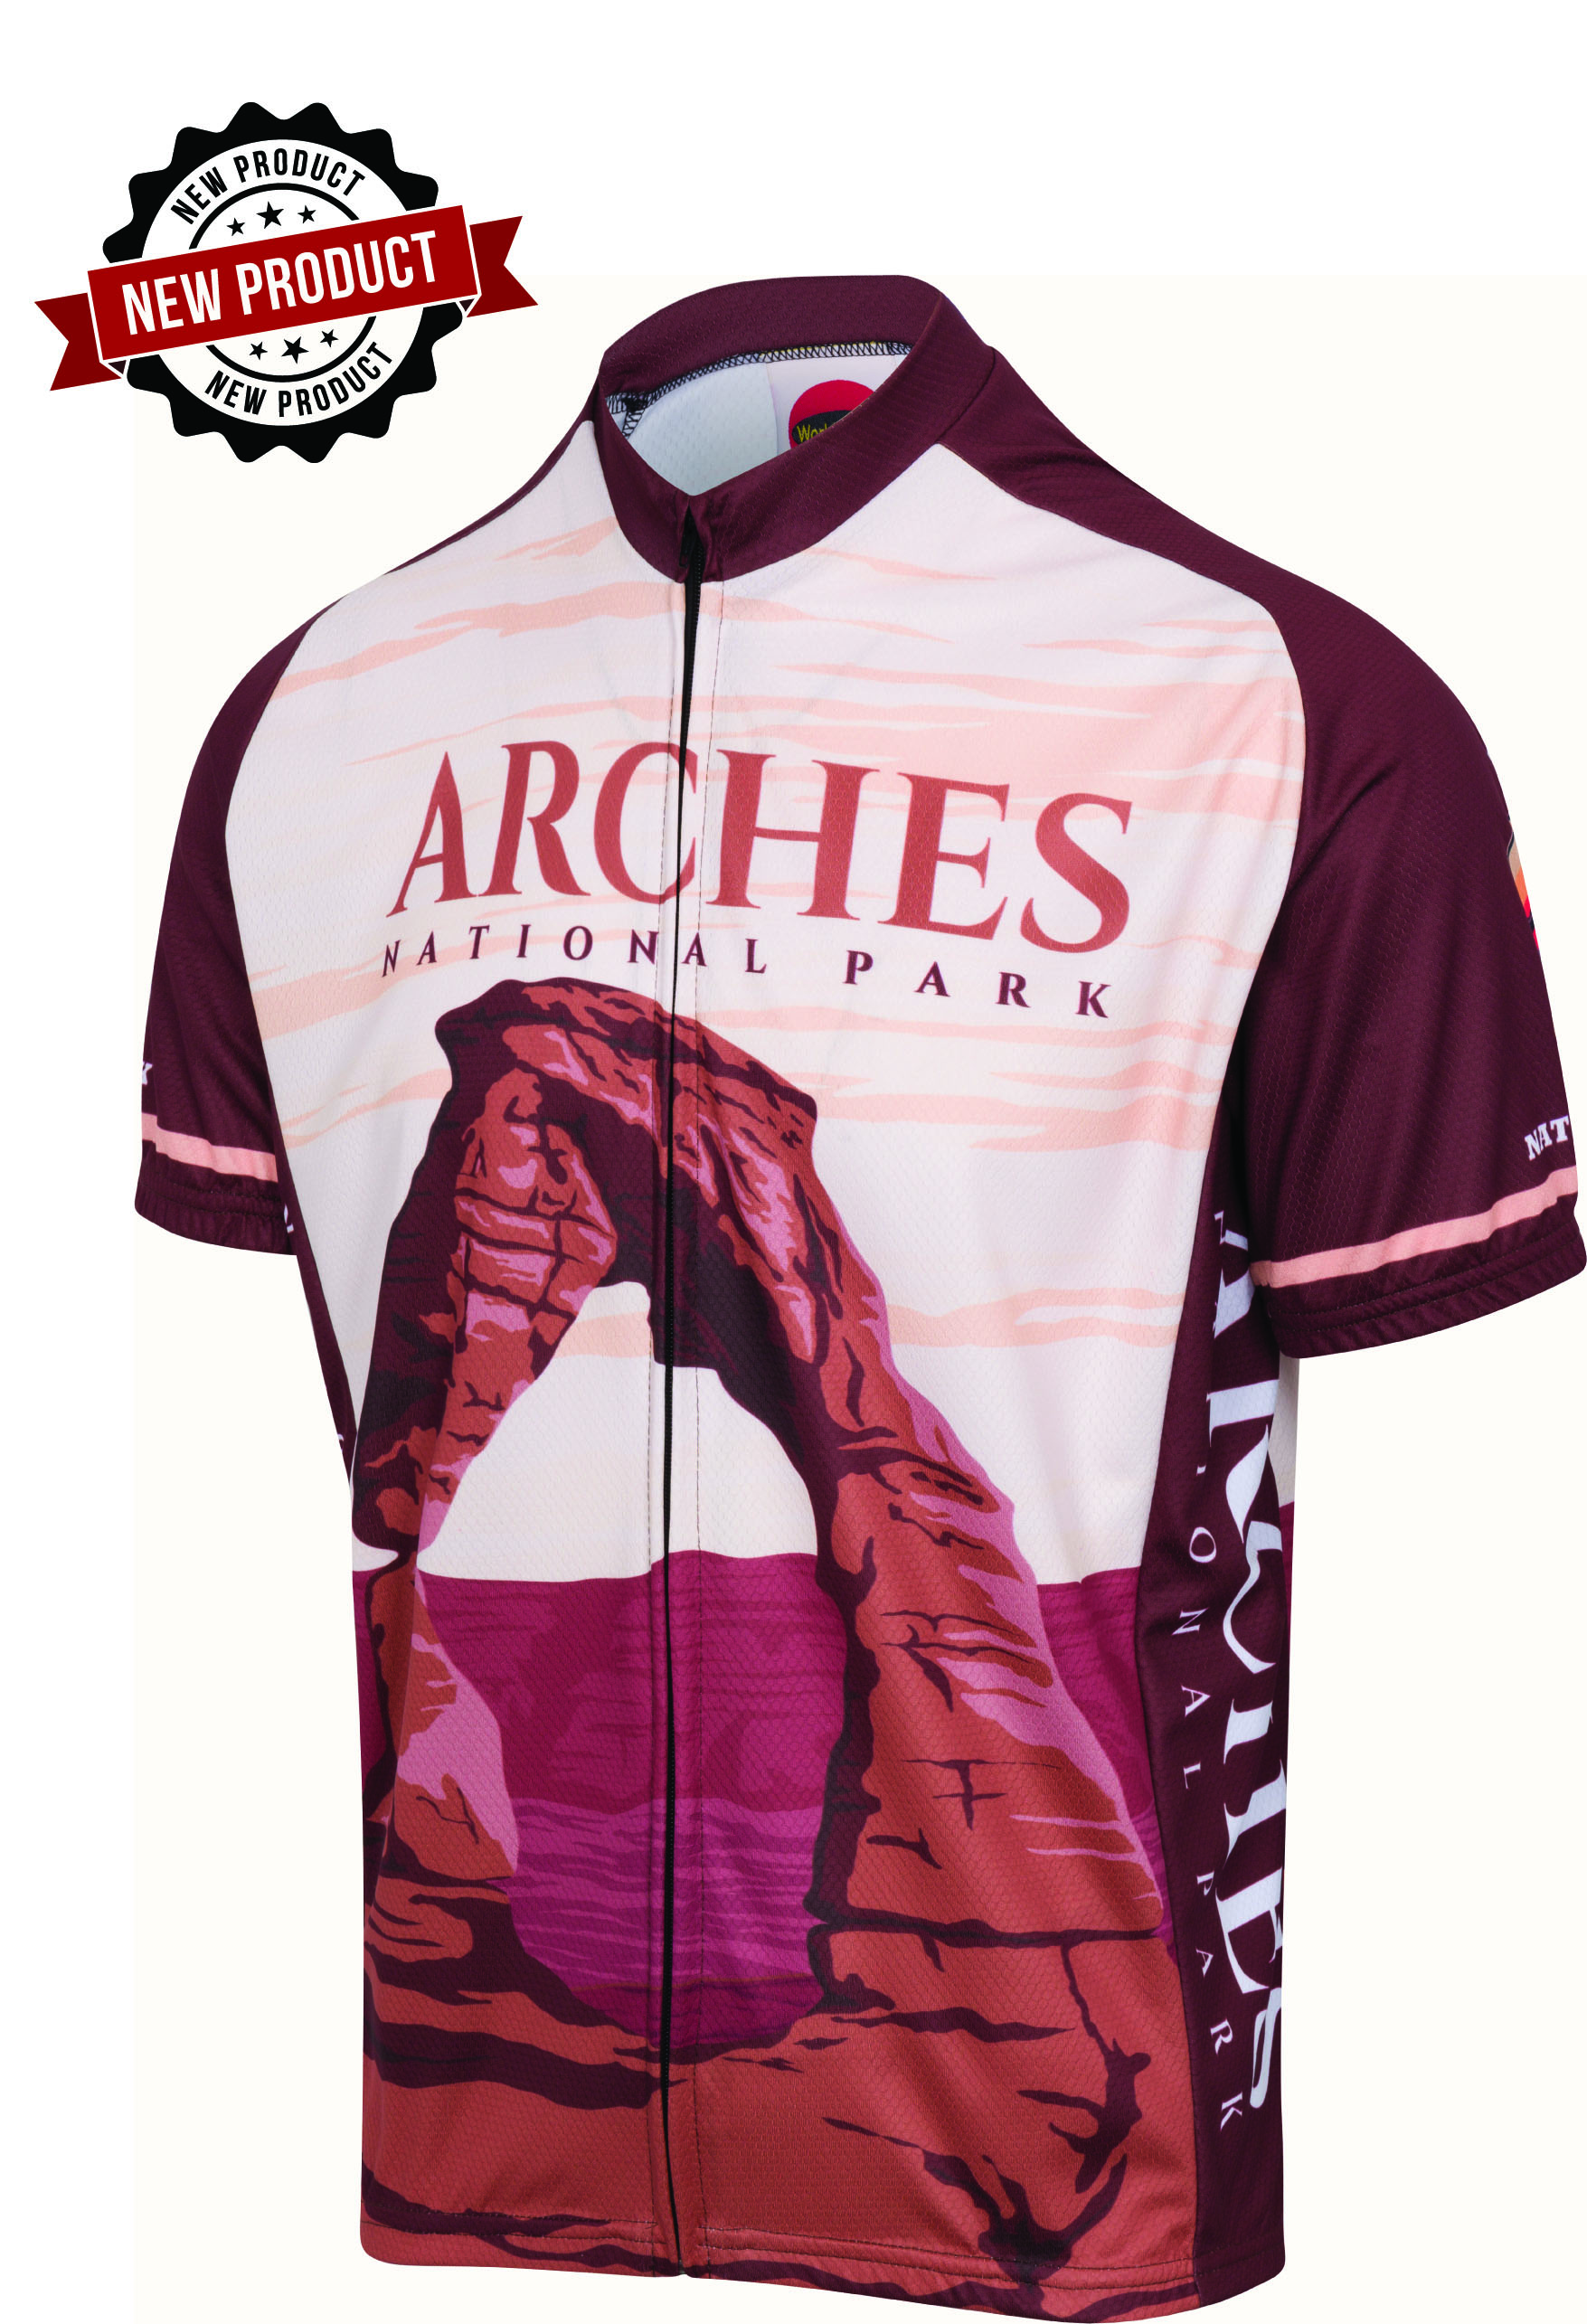 Arches National Park Cycling Jersey